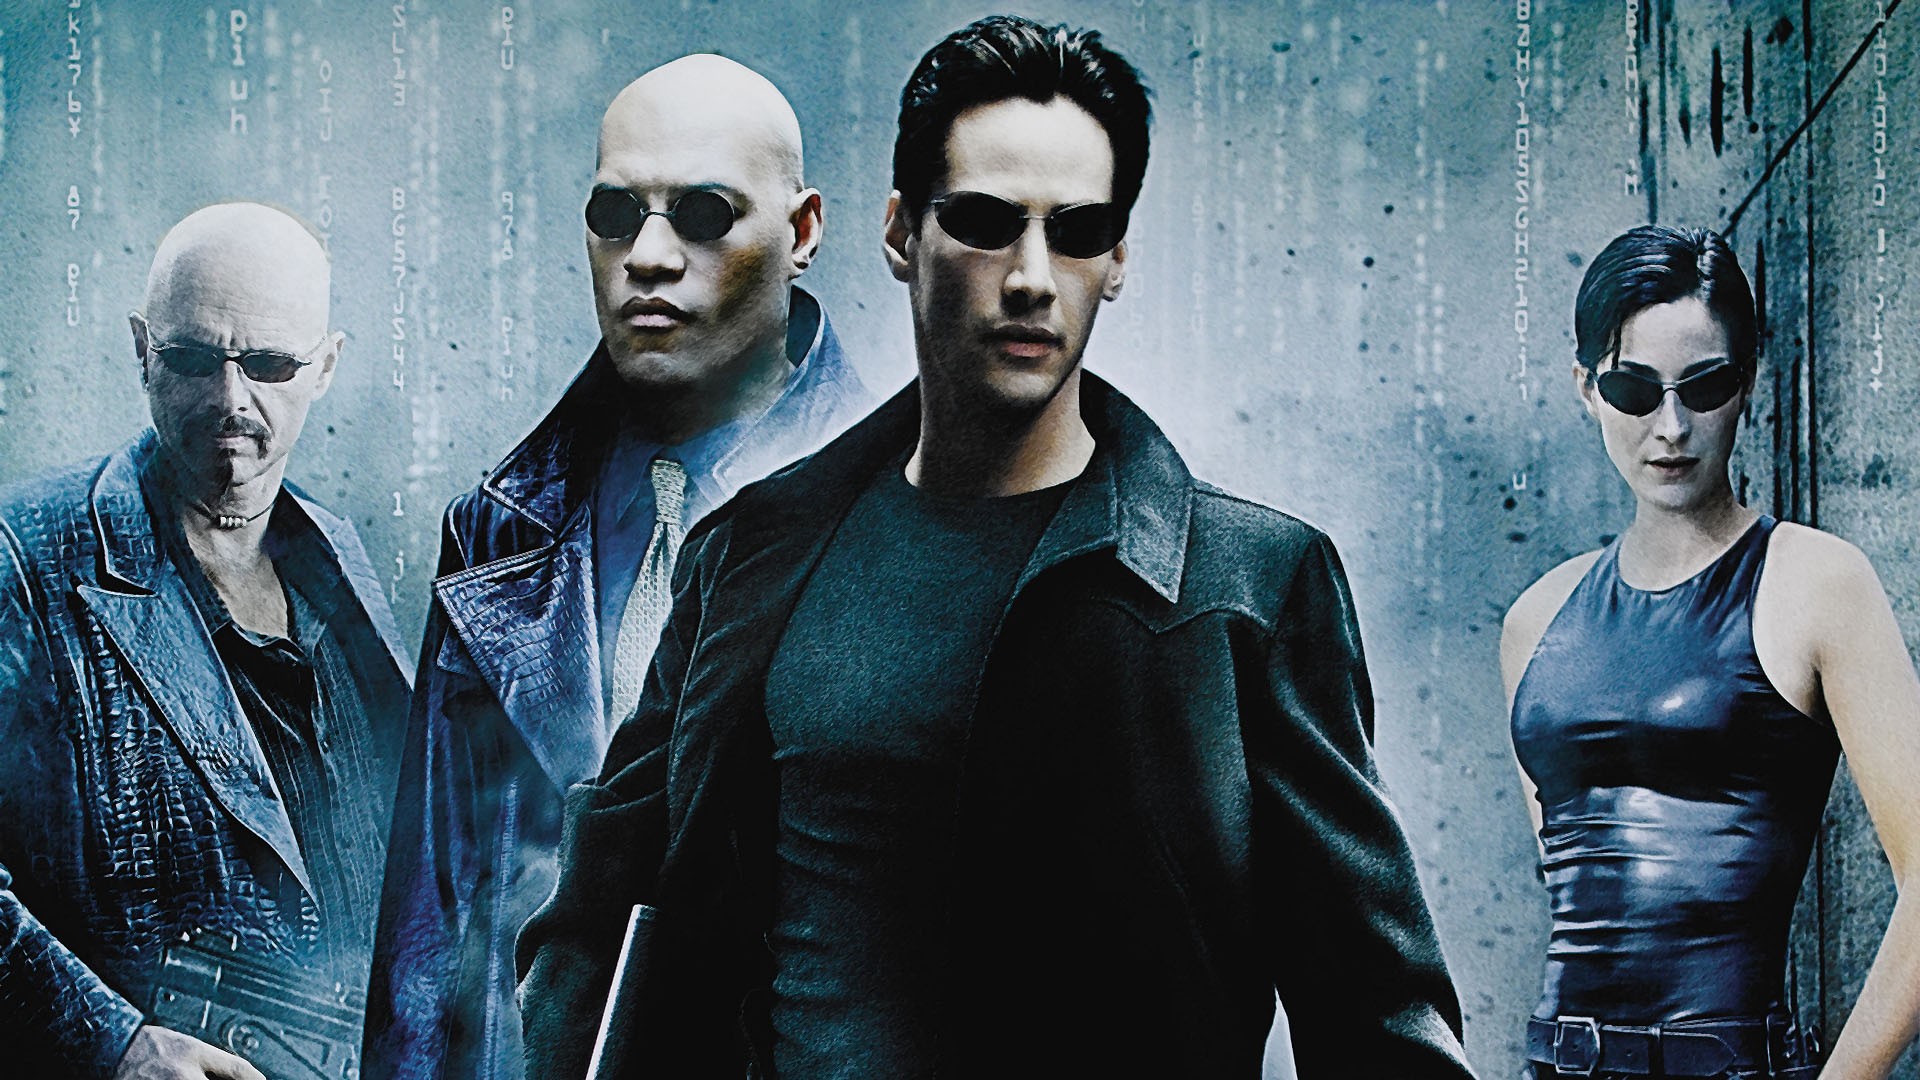 Movies The Matrix Trinity Movies Keanu Reeves Movie Poster Laurence Fishburne Shades 1999 Year 1920x1080